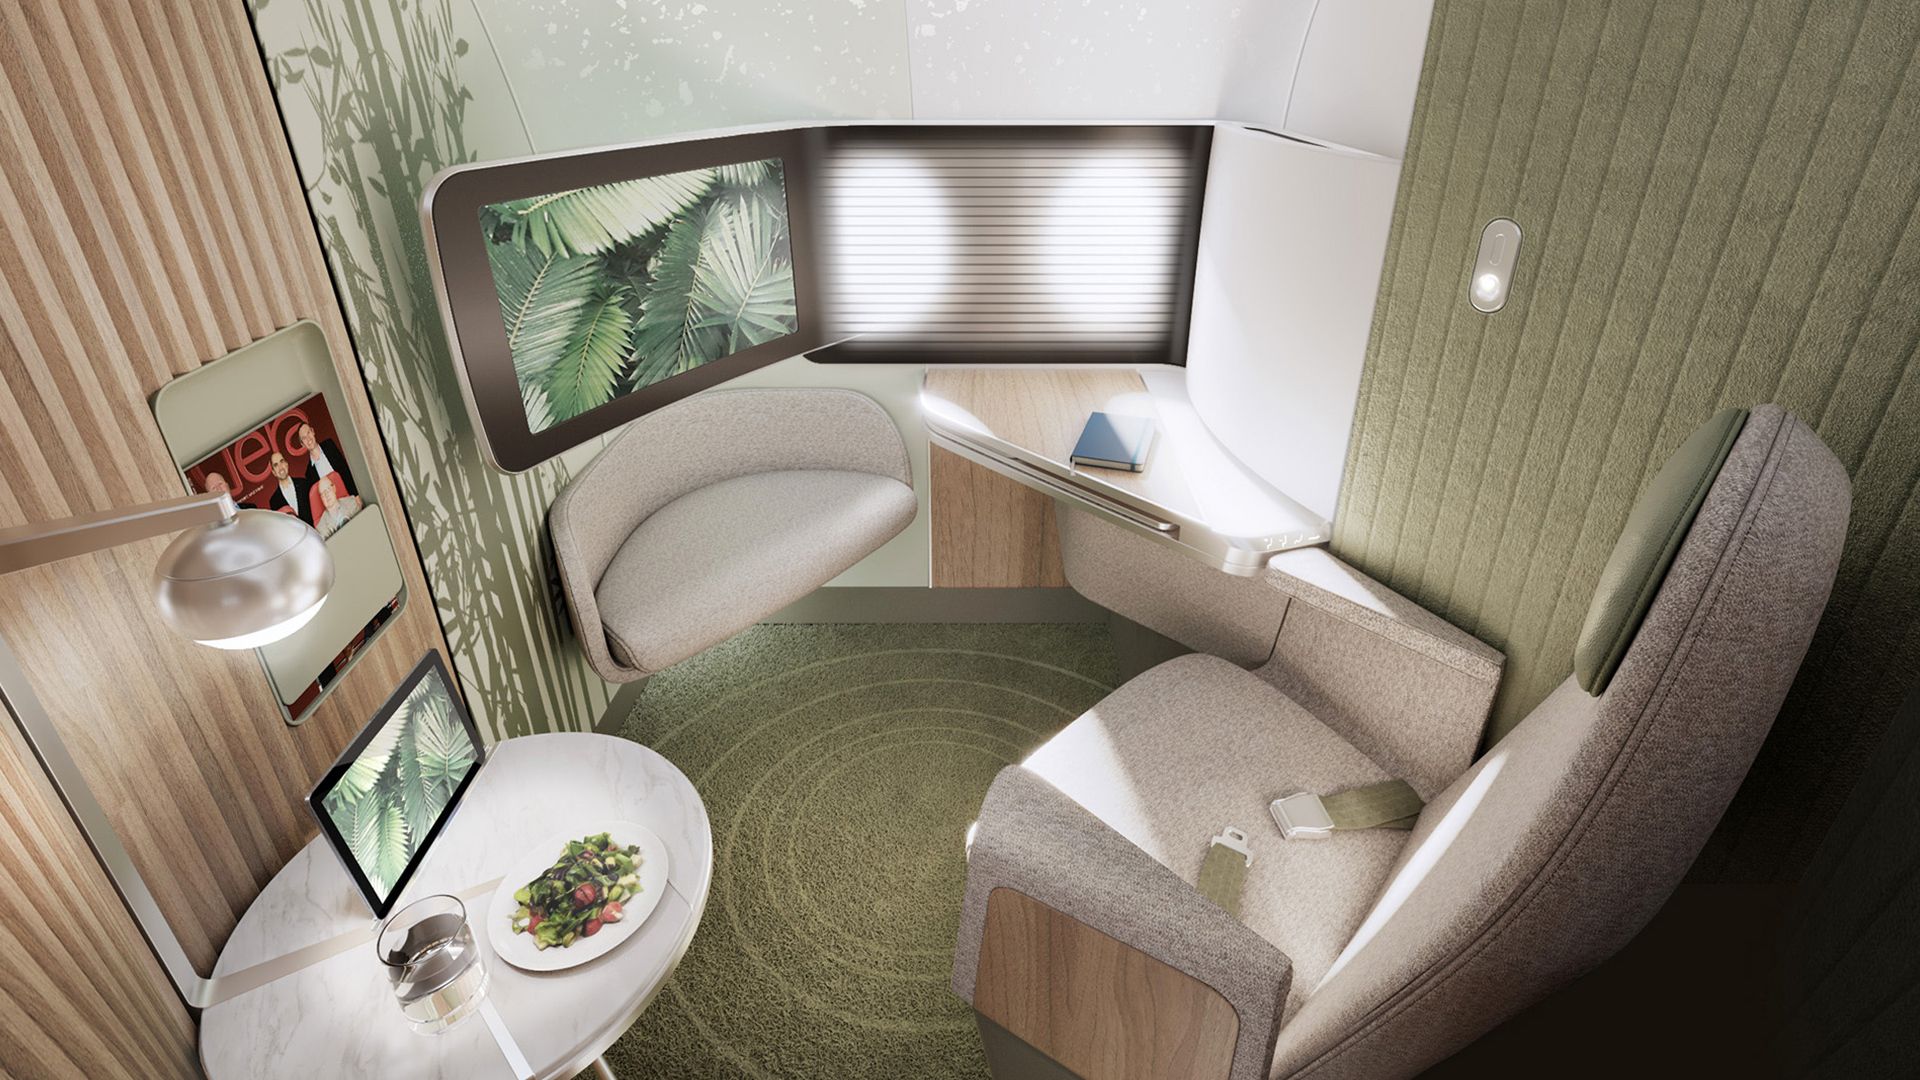 Image of a more spacious first class airplane cabin. as envisioned by Teague, a design firm. 